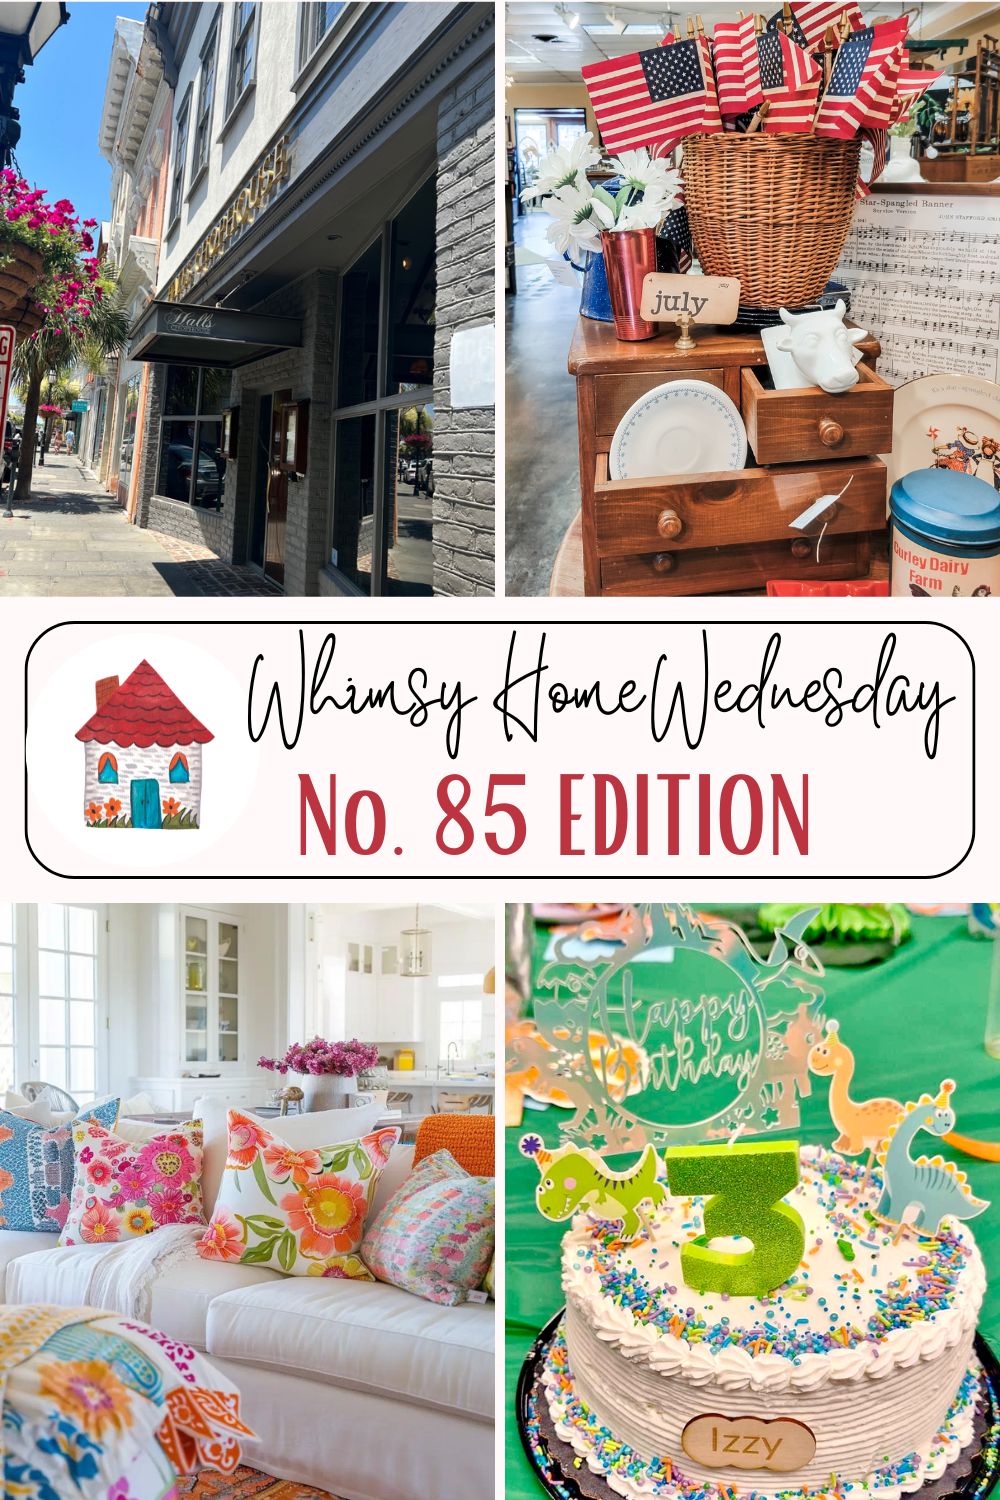 Join us on Whimsy Home Wednesday Blog Link Party No. 85 and see host projects, the features from the previous week and link up your posts!